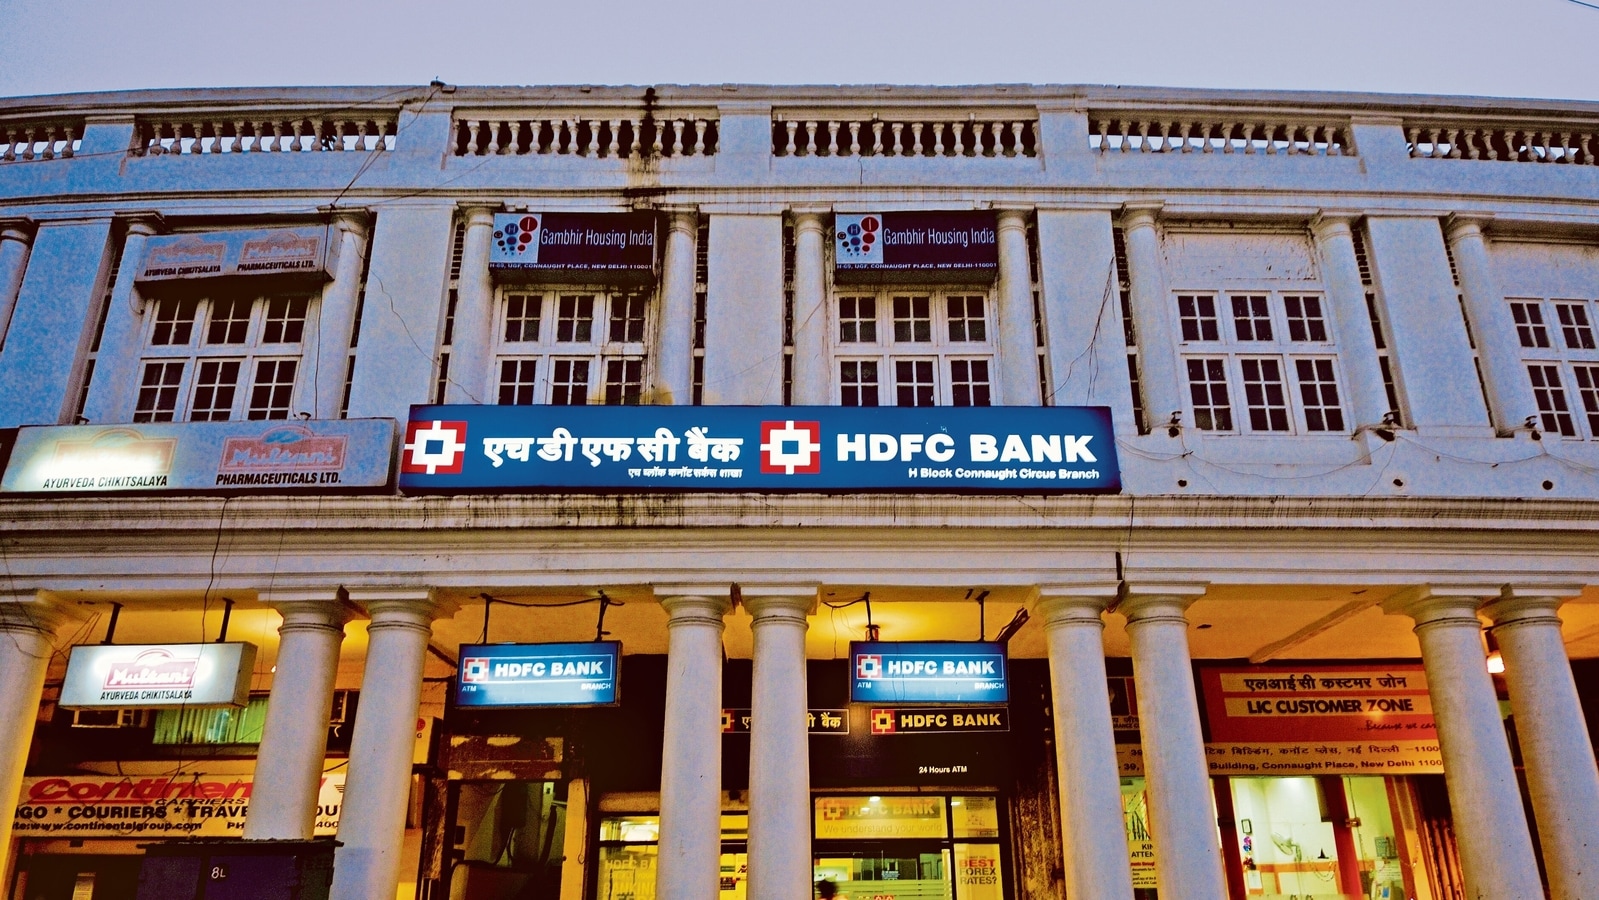 3 hdfc bank employees, 9 others held for trying to withdraw from nri account - hindustan times